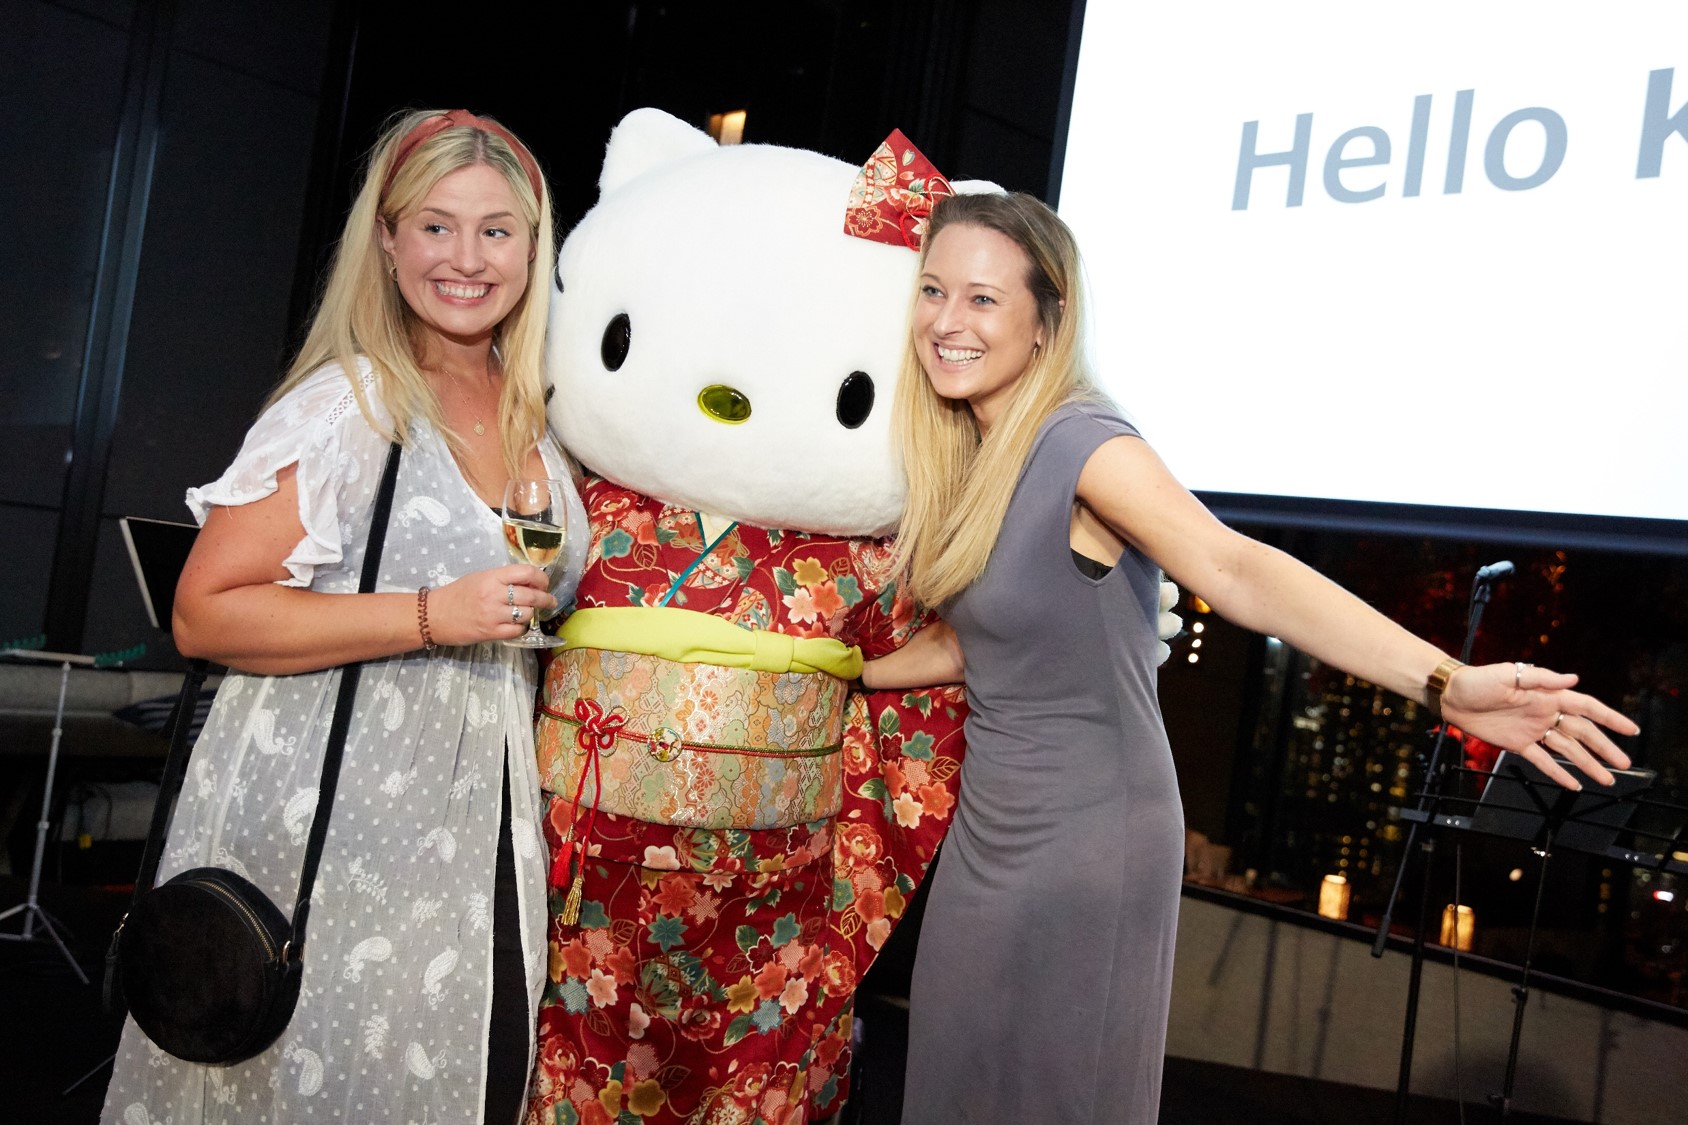 Hello Kitty would love to welcome your guests to receptions and parties!